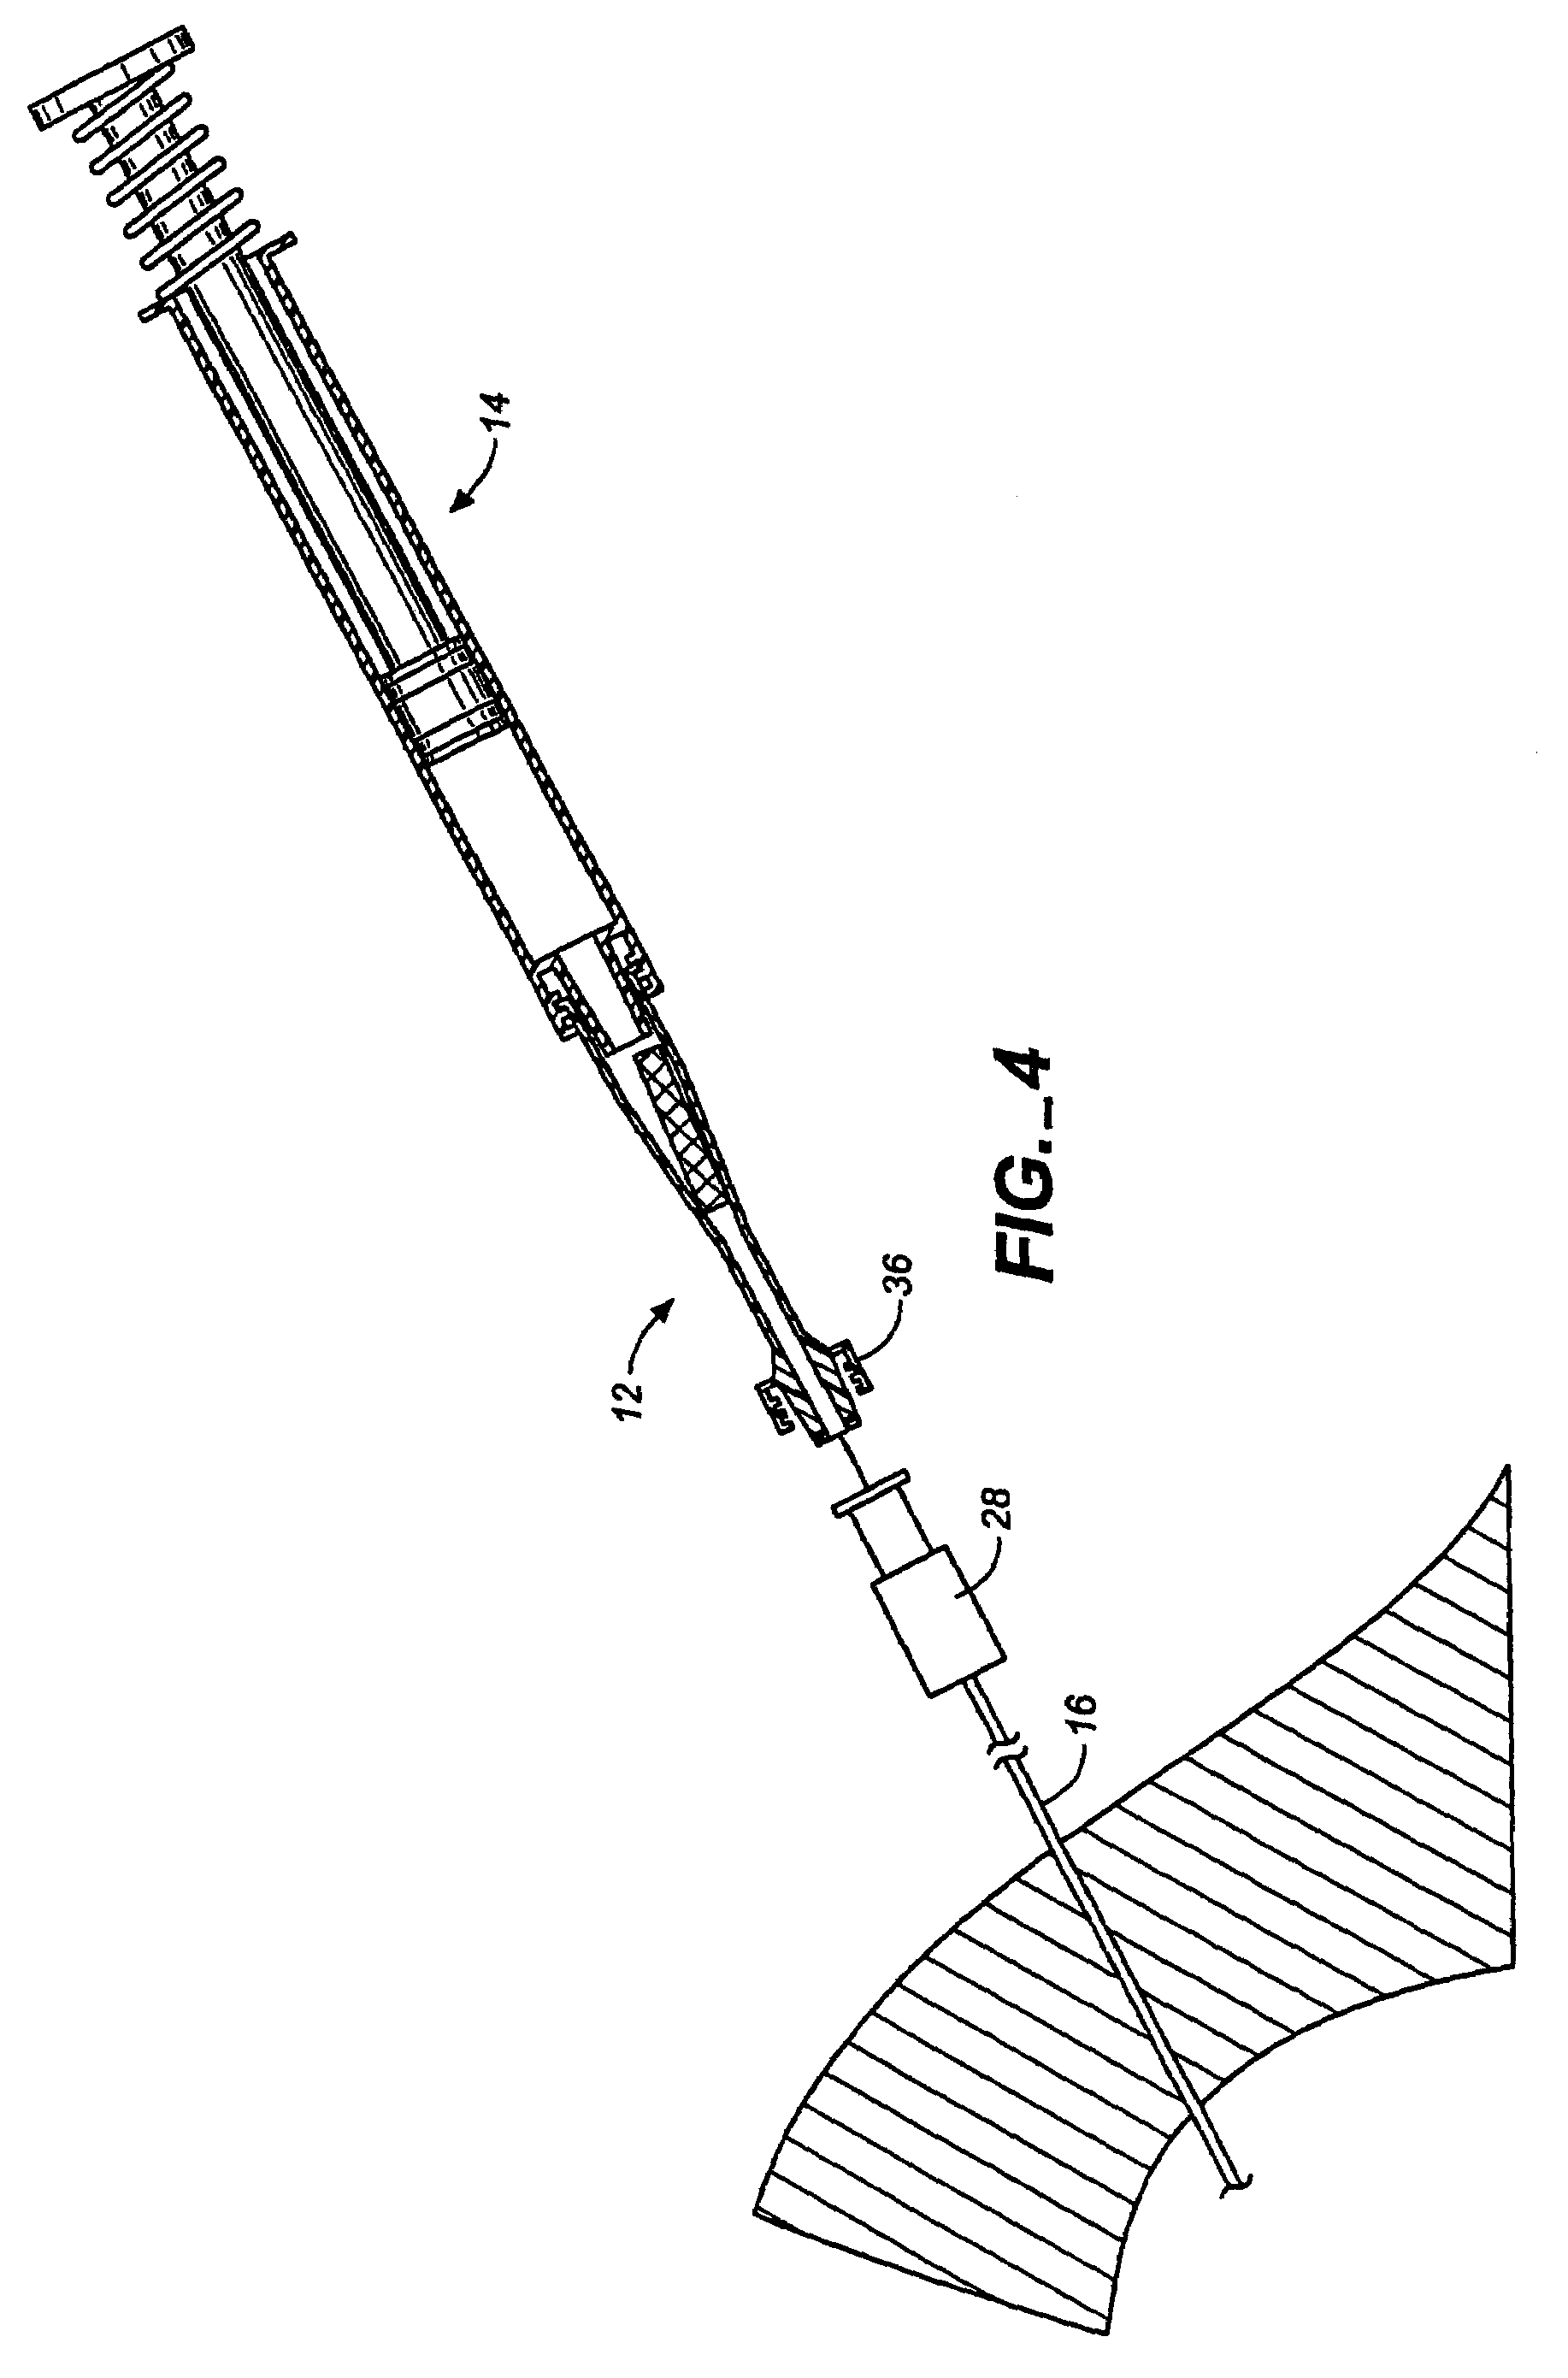 Absorbable sponge with contrasting agent